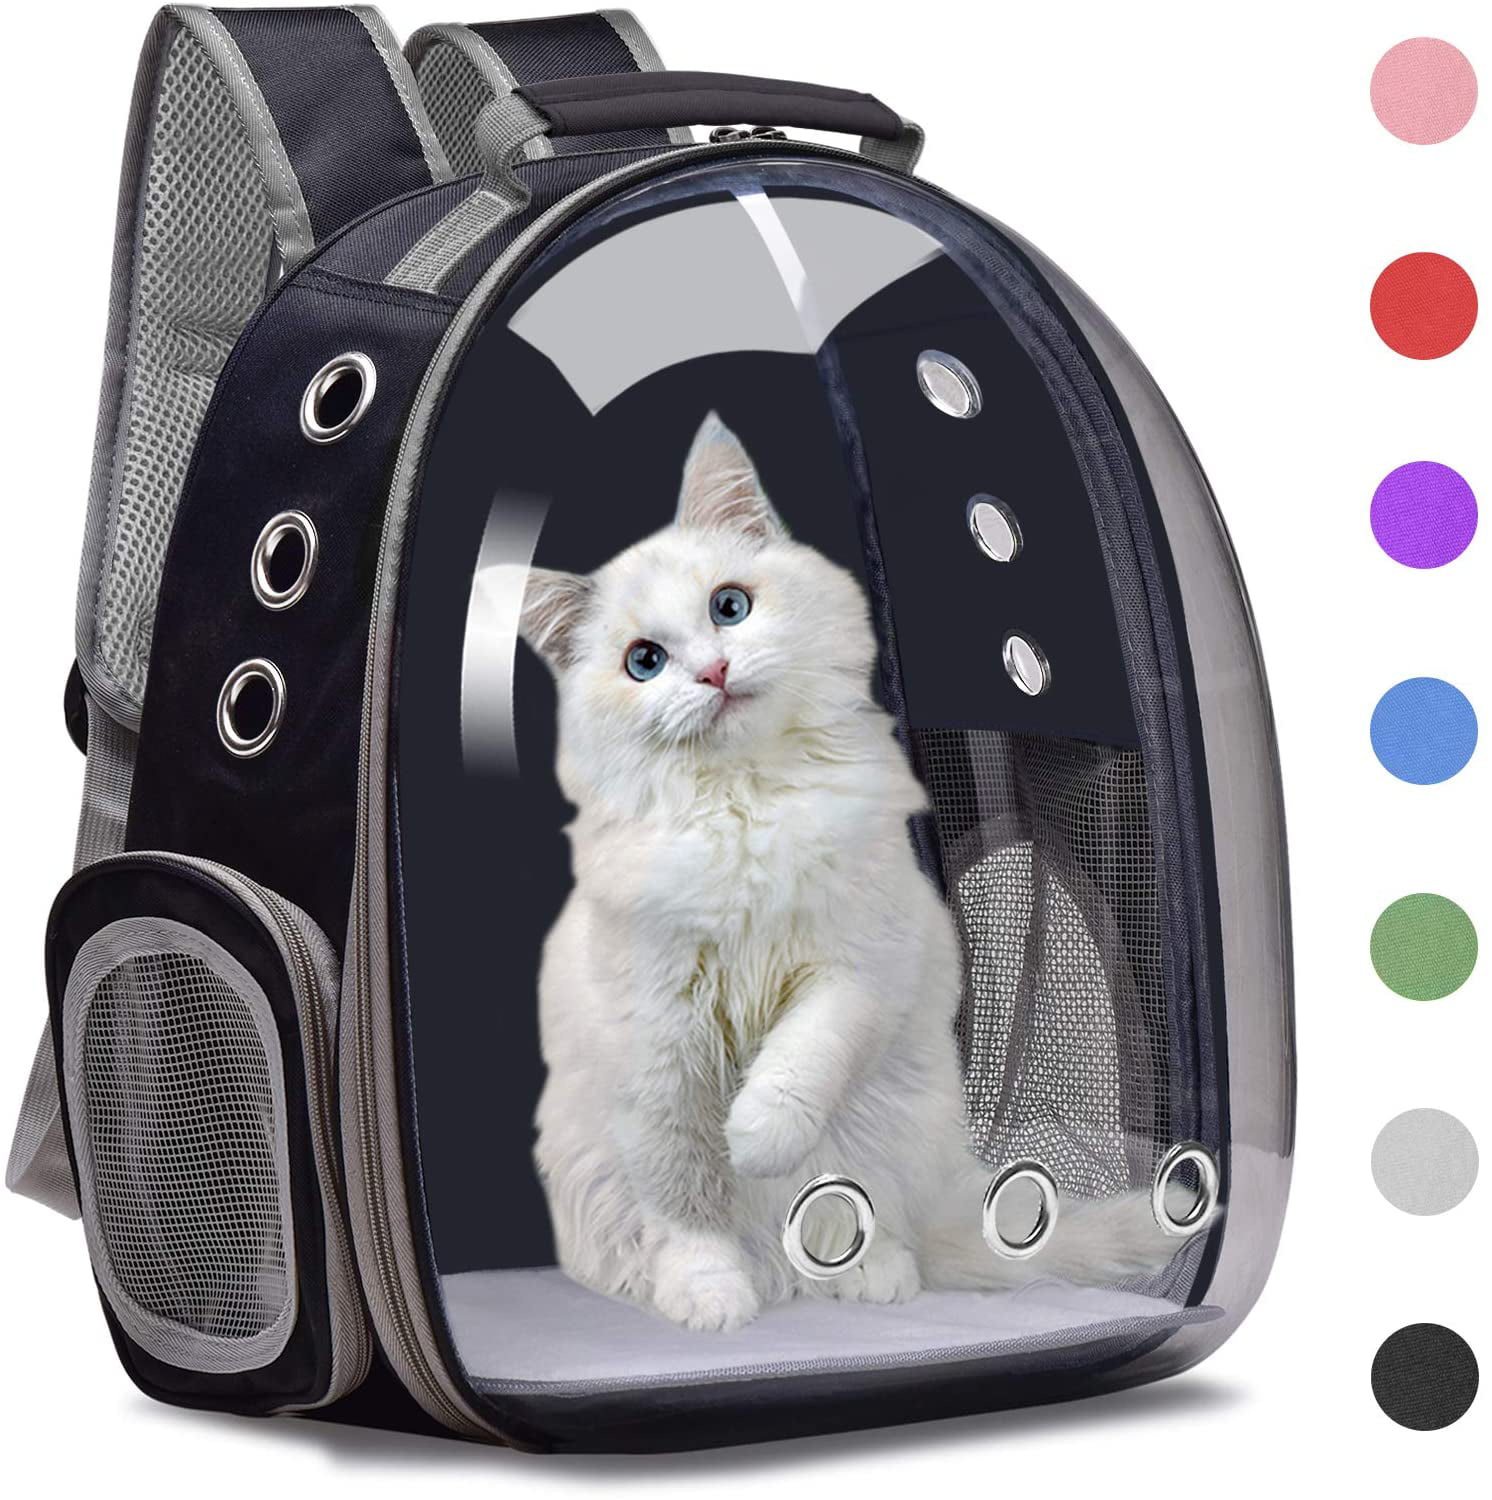 Travel Cat Backpack Instructions - Cat Meme Stock Pictures and Photos